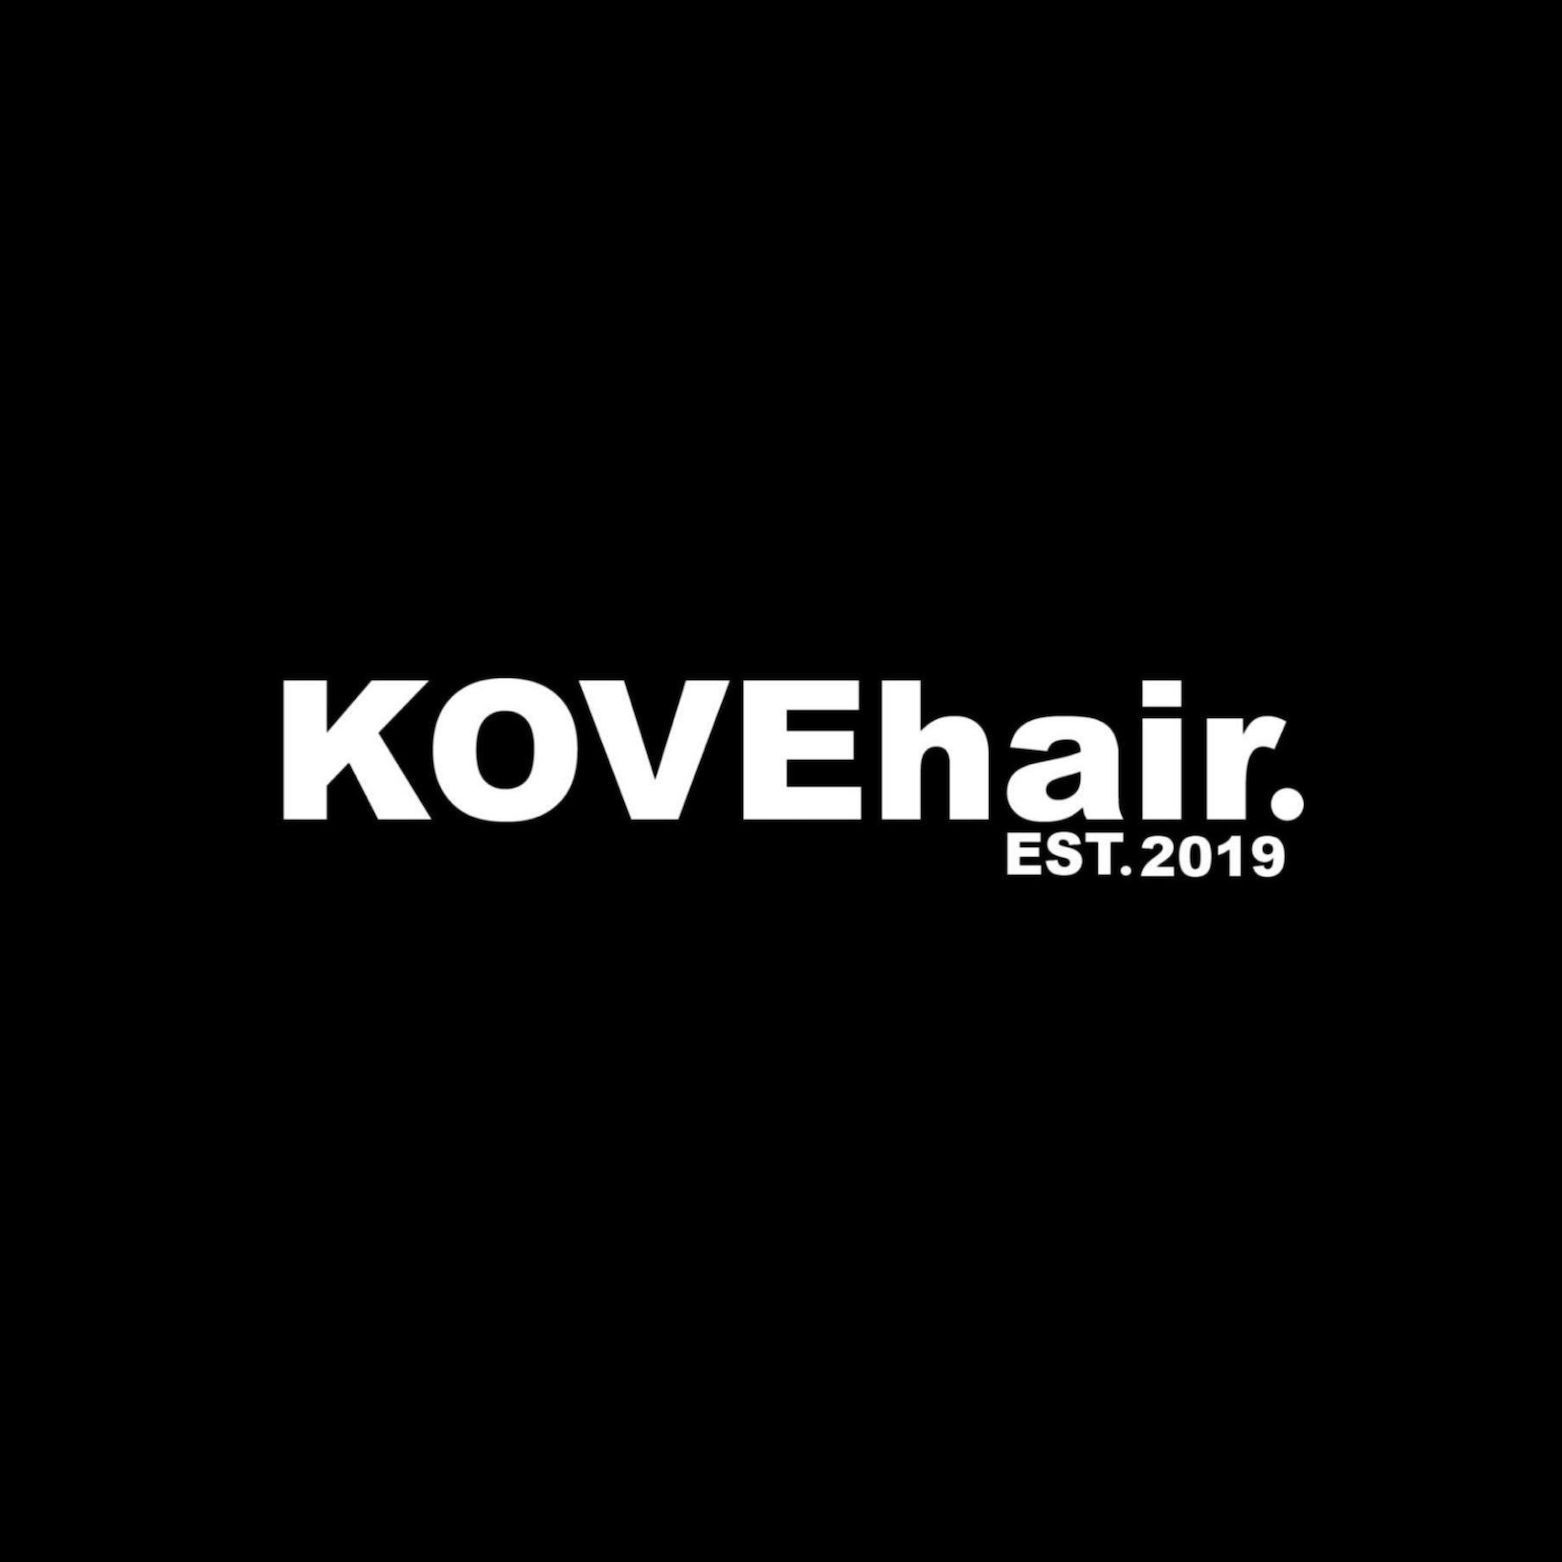 KOVEhair., 97a Old Port Road Queenstown 5013, Shop 4, 5013, Adelaide